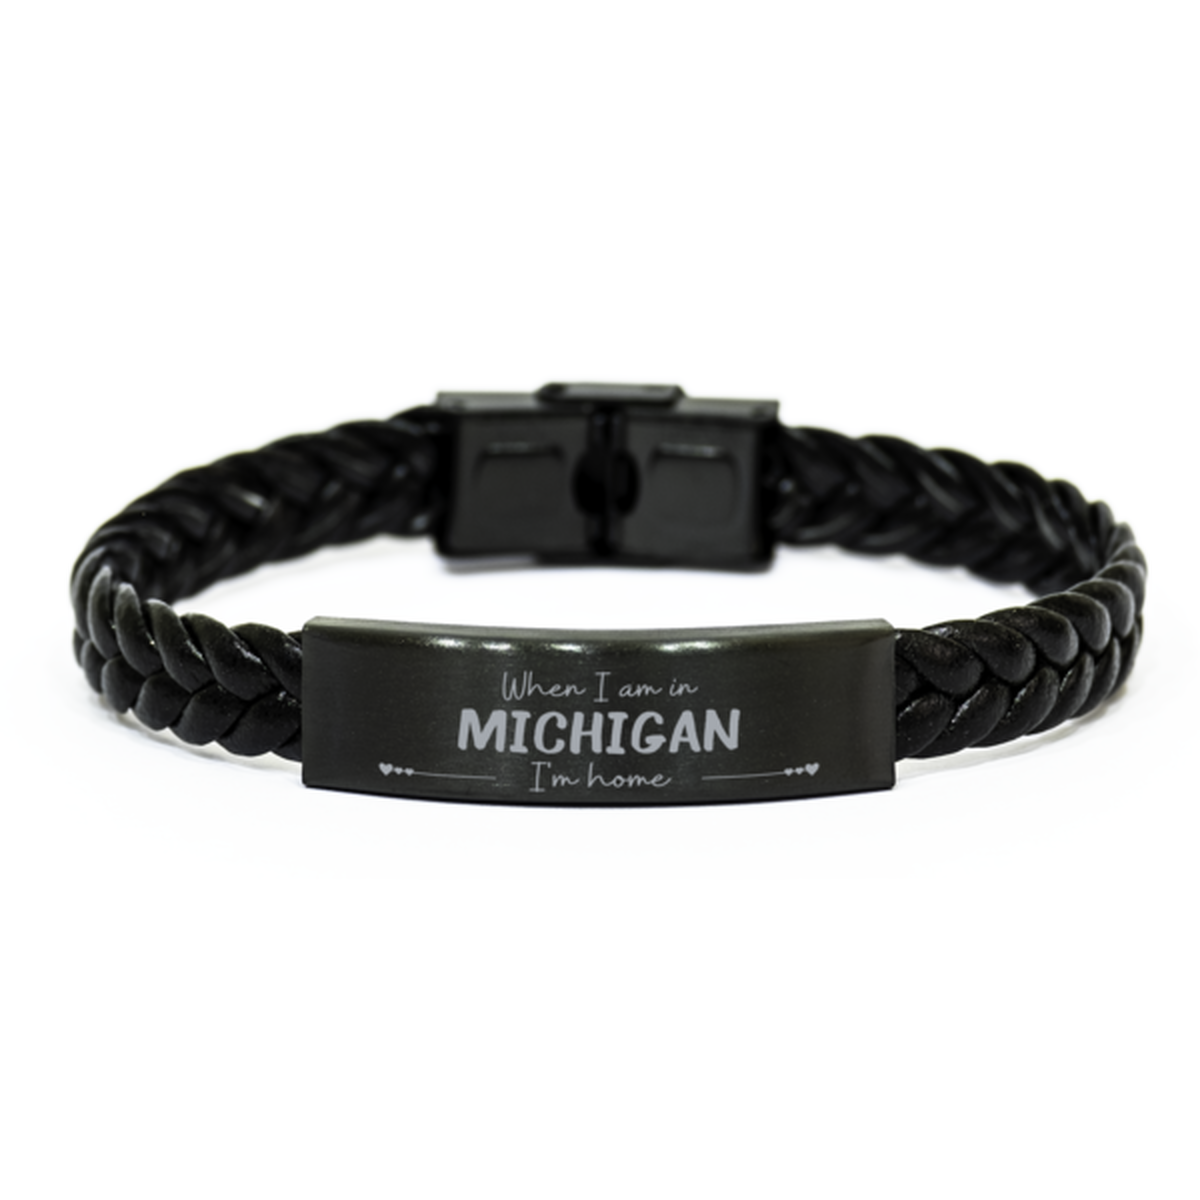 When I am in Michigan I'm home Braided Leather Bracelet, Cheap Gifts For Michigan, State Michigan Birthday Gifts for Friends Coworker